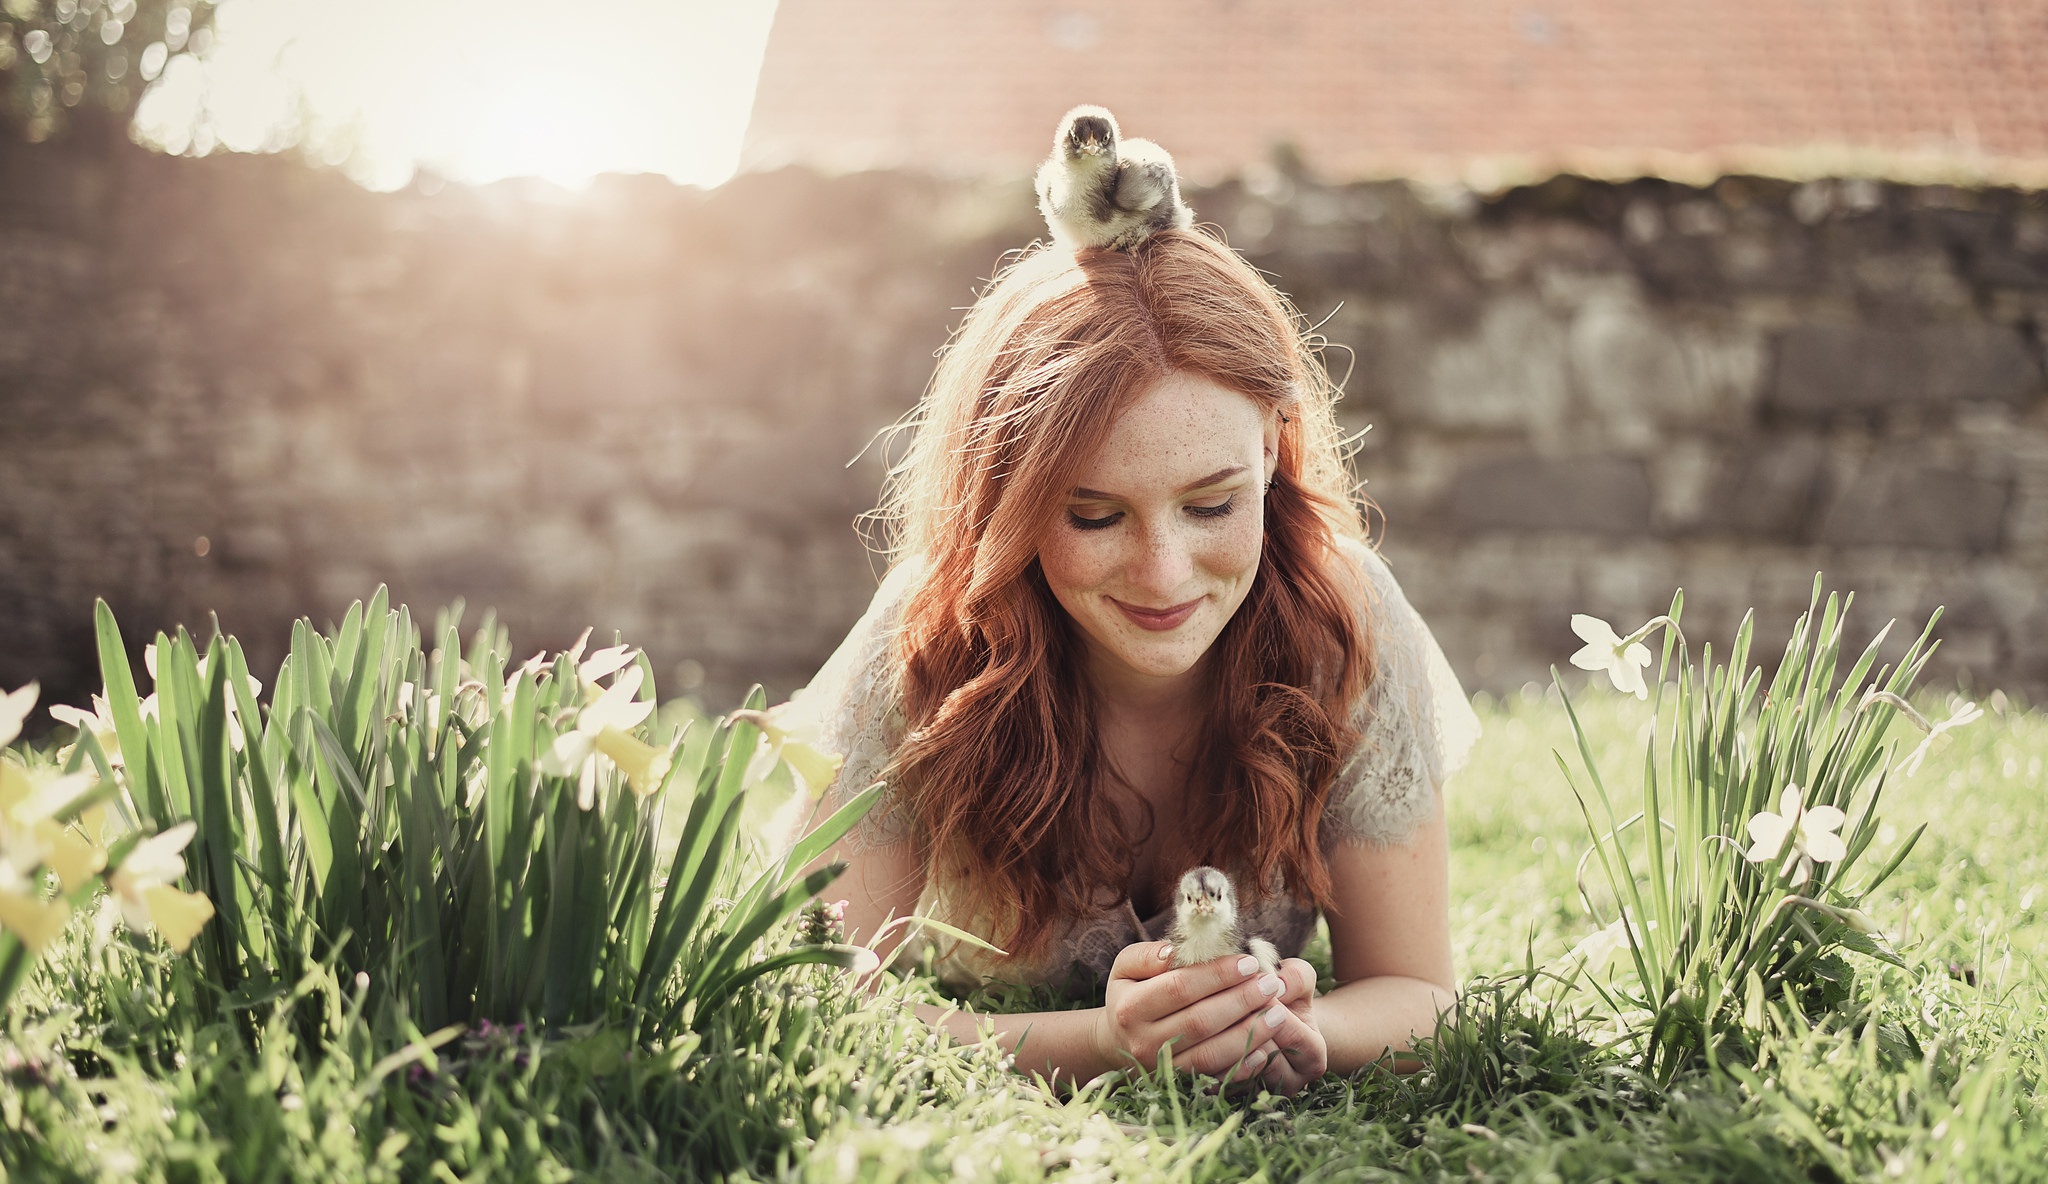 Full HD women, mood, baby animal, chick, freckles, grass, lying down, model, redhead, smile, sunny